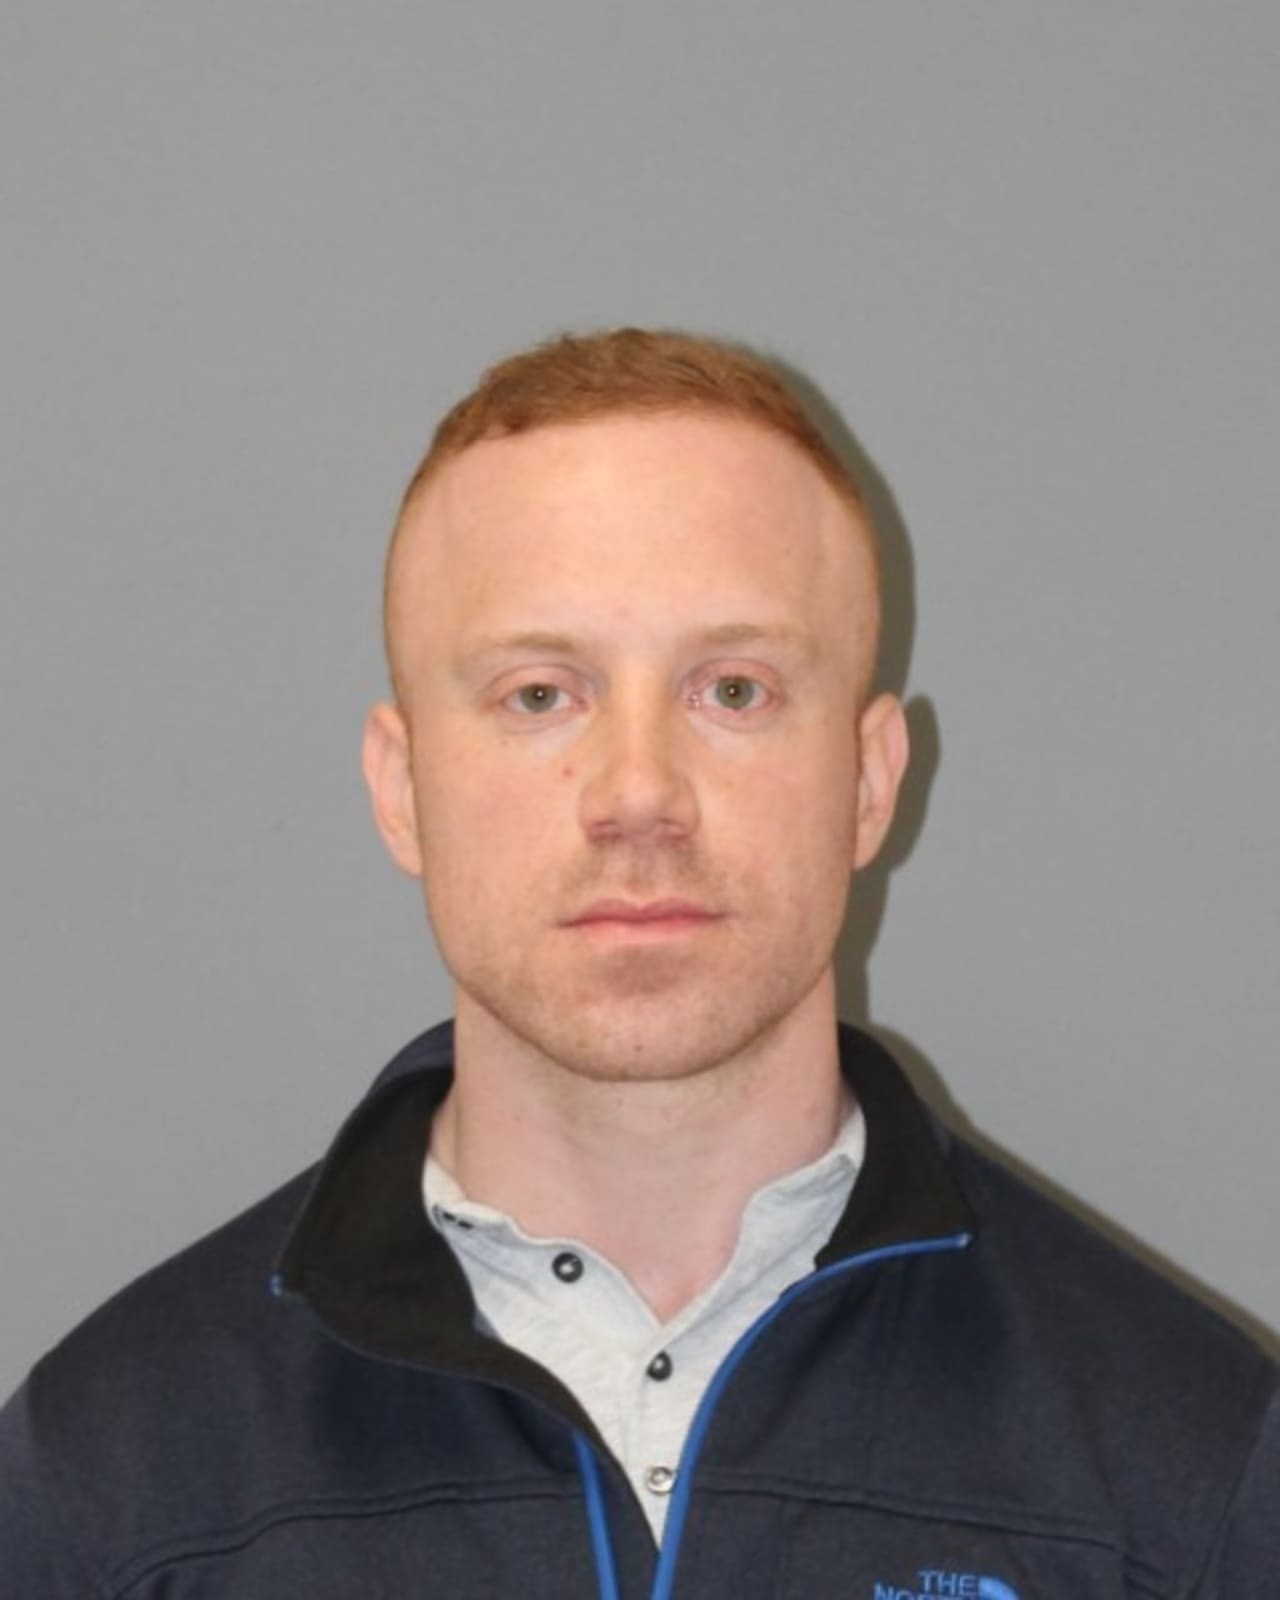 State Trooper Mitchell Paz, age 29, was arrested for allegedly allowing a third party to access sensitive information on a state police electronic reporting system.